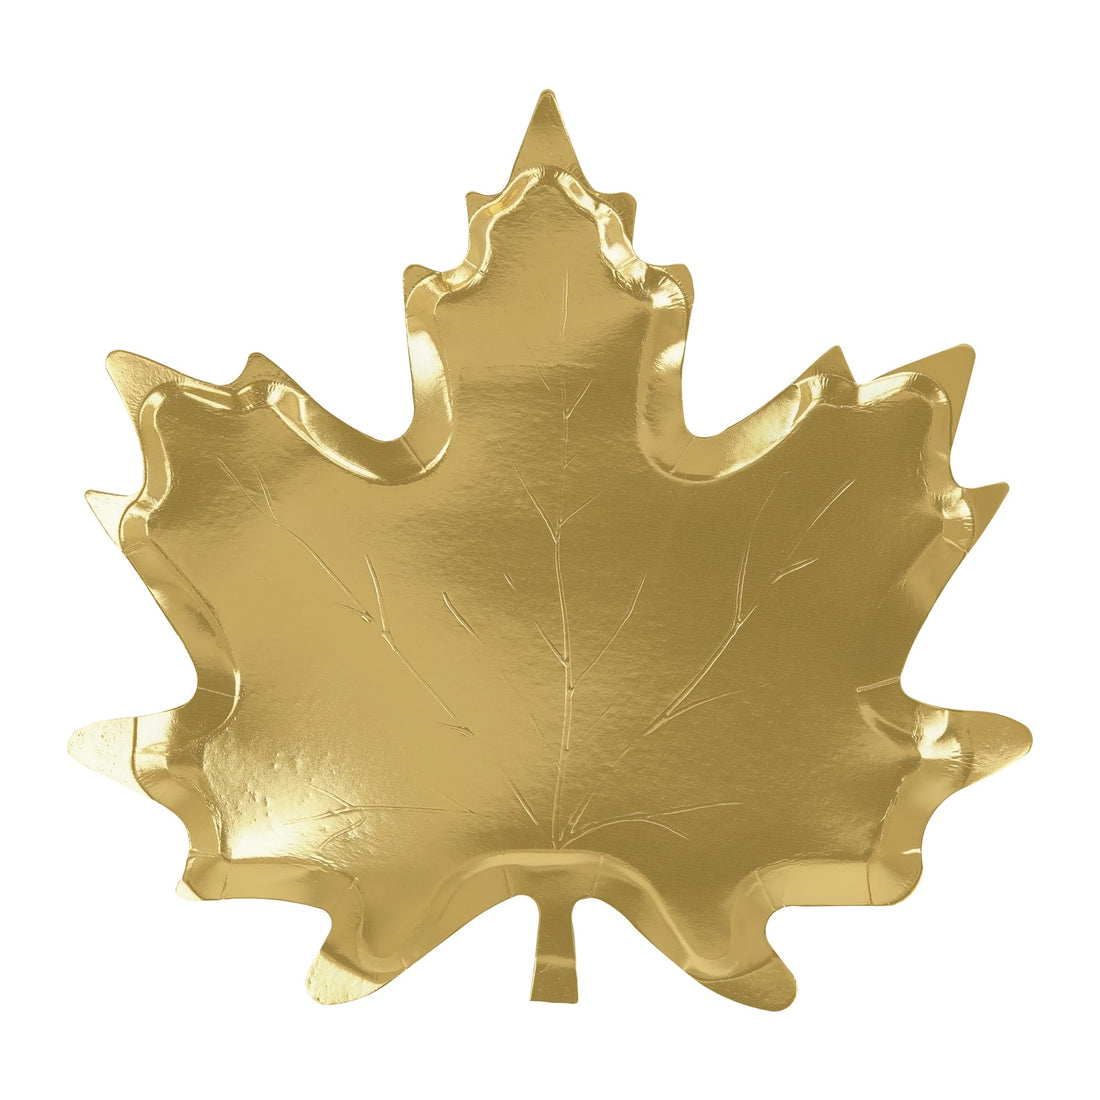 Shiny gold plate shaped like a maple leaf with embossed detailing 